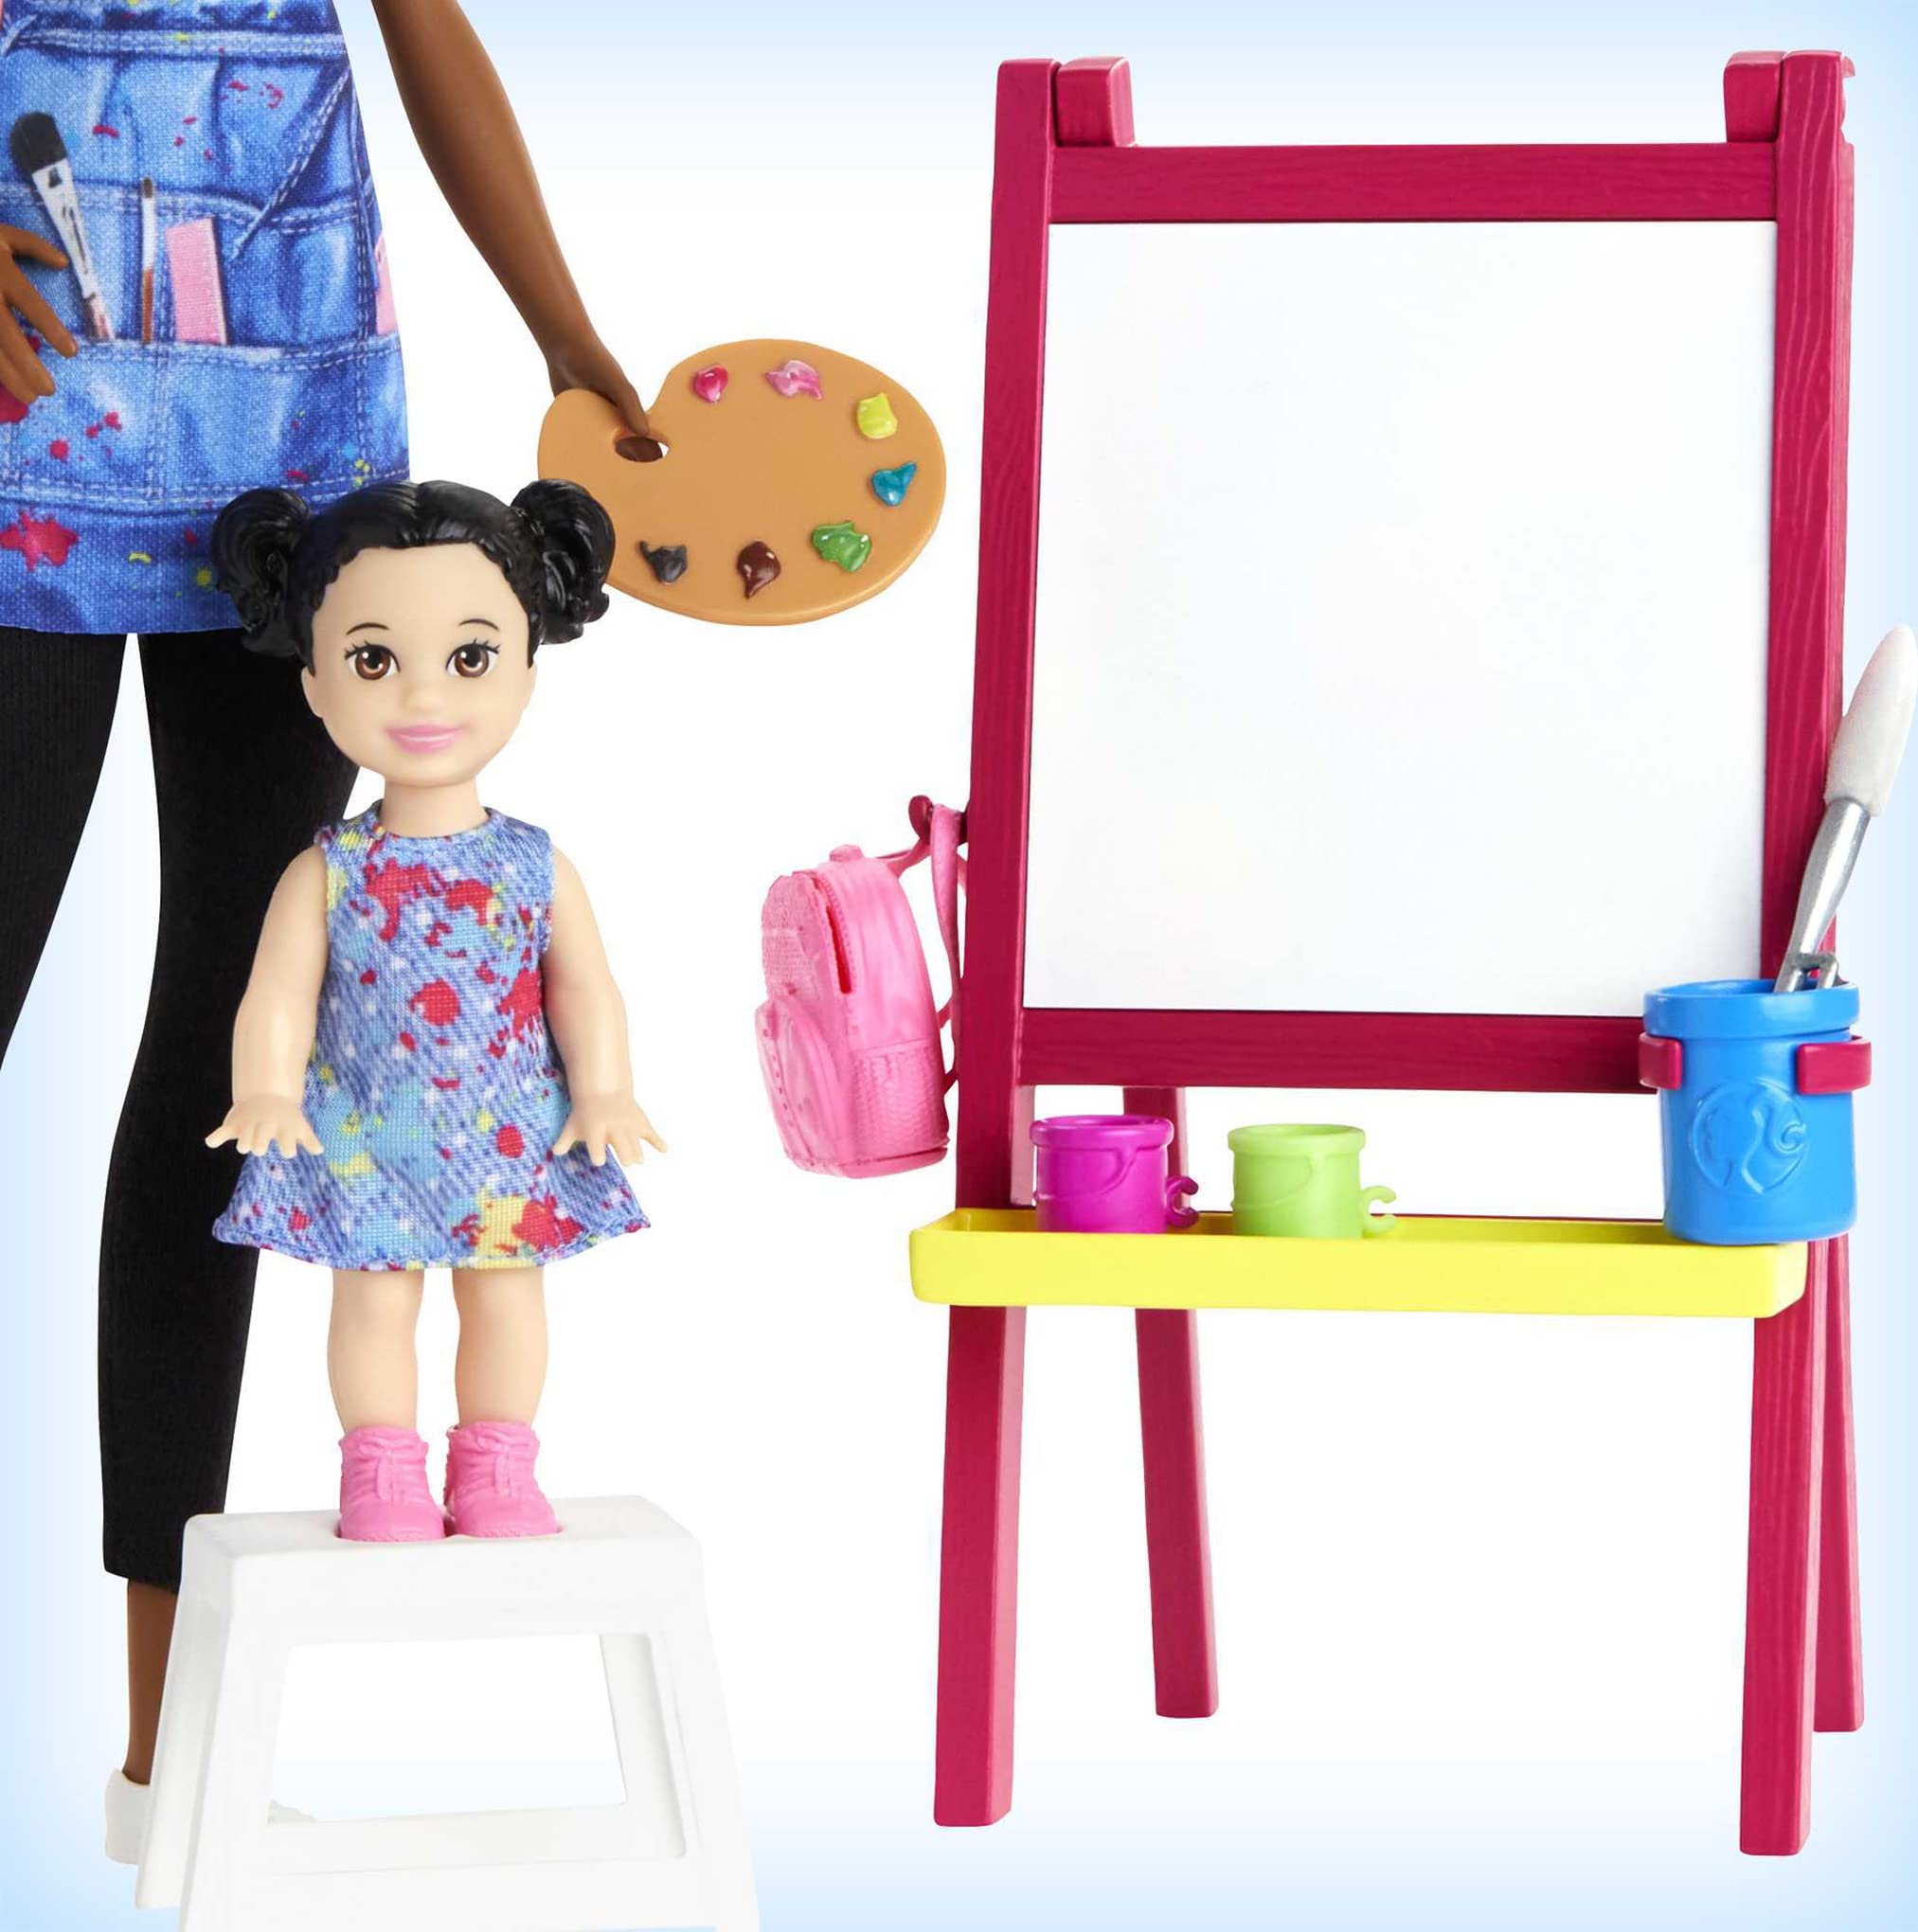 Barbie Careers Doll & Playset, Art Teacher Theme with Brunette Doll, 1 Toddler Doll, Color-Change Easel & Accessories